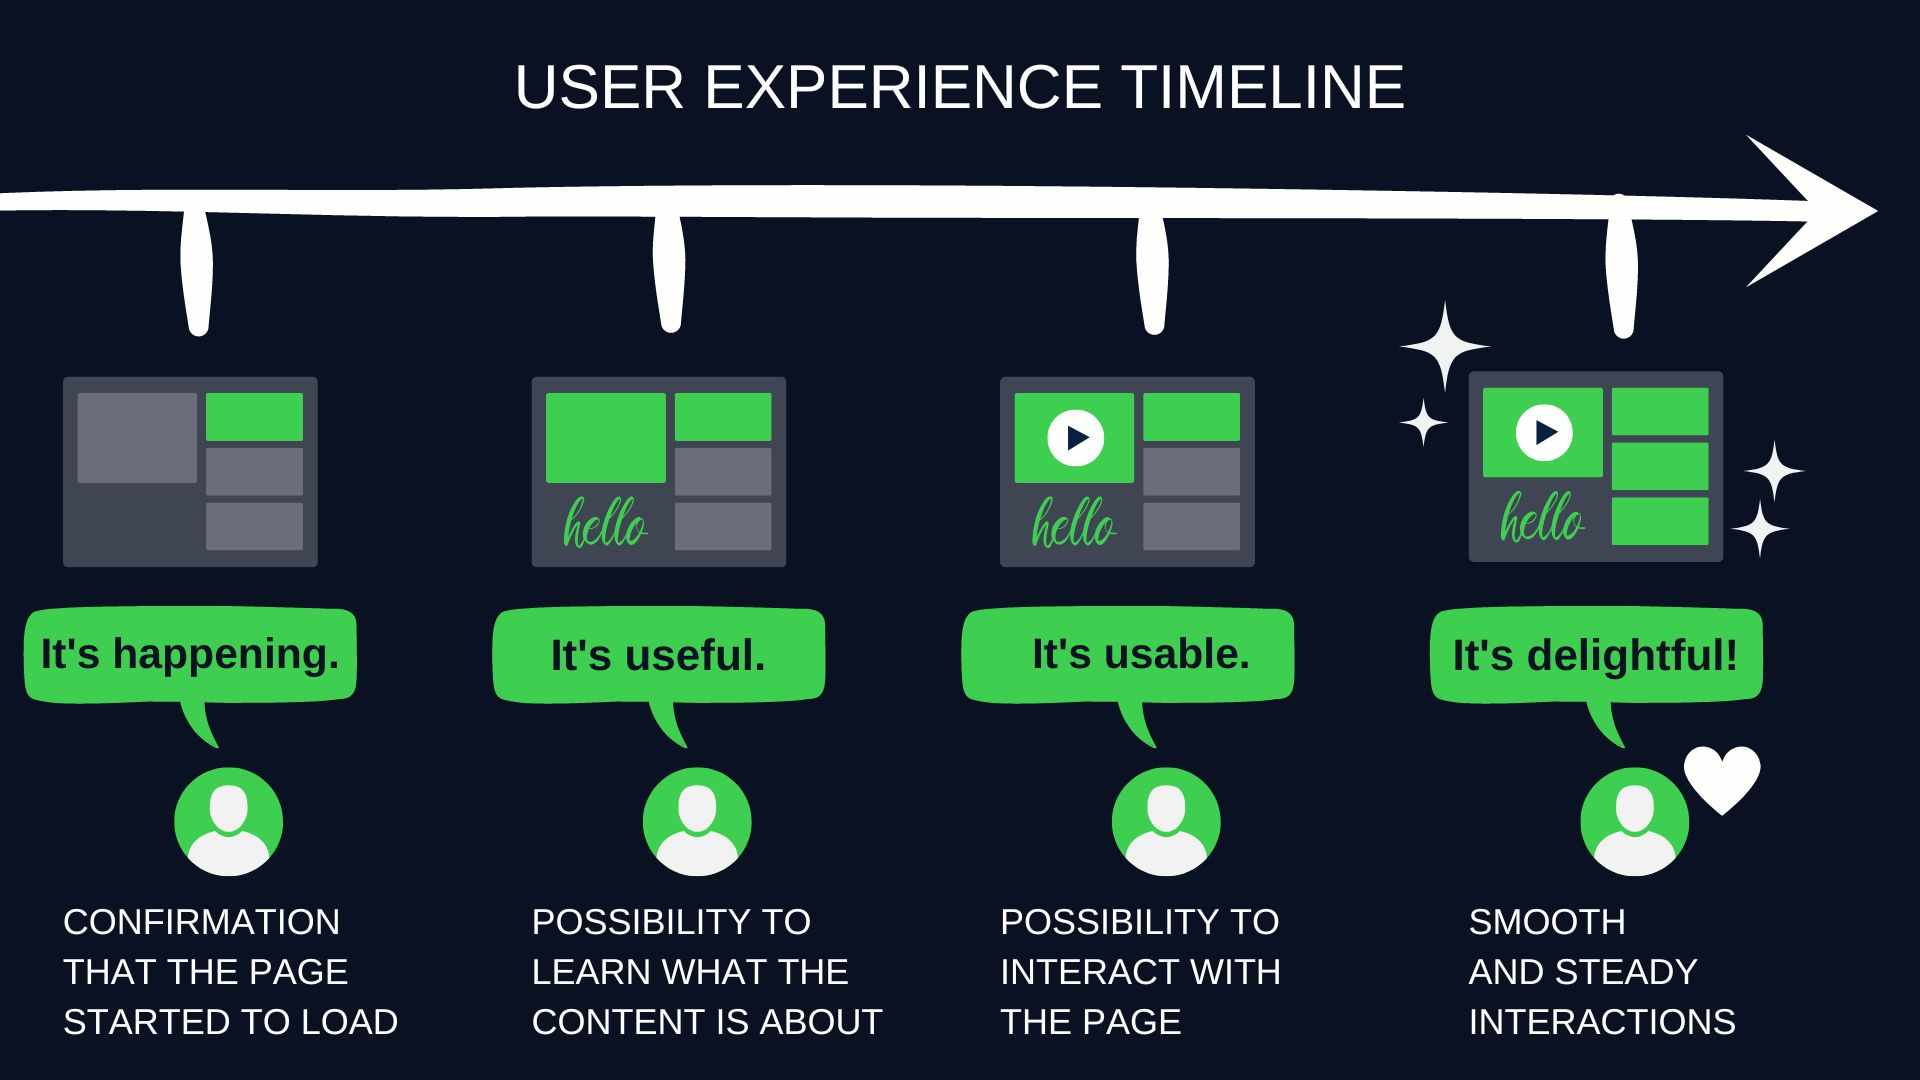 User experience timeline visualization. The user's journey begins with the webpage's loading, followed by recognizing its theme, evaluating its usability, and finally feeling pleased with its responsiveness.